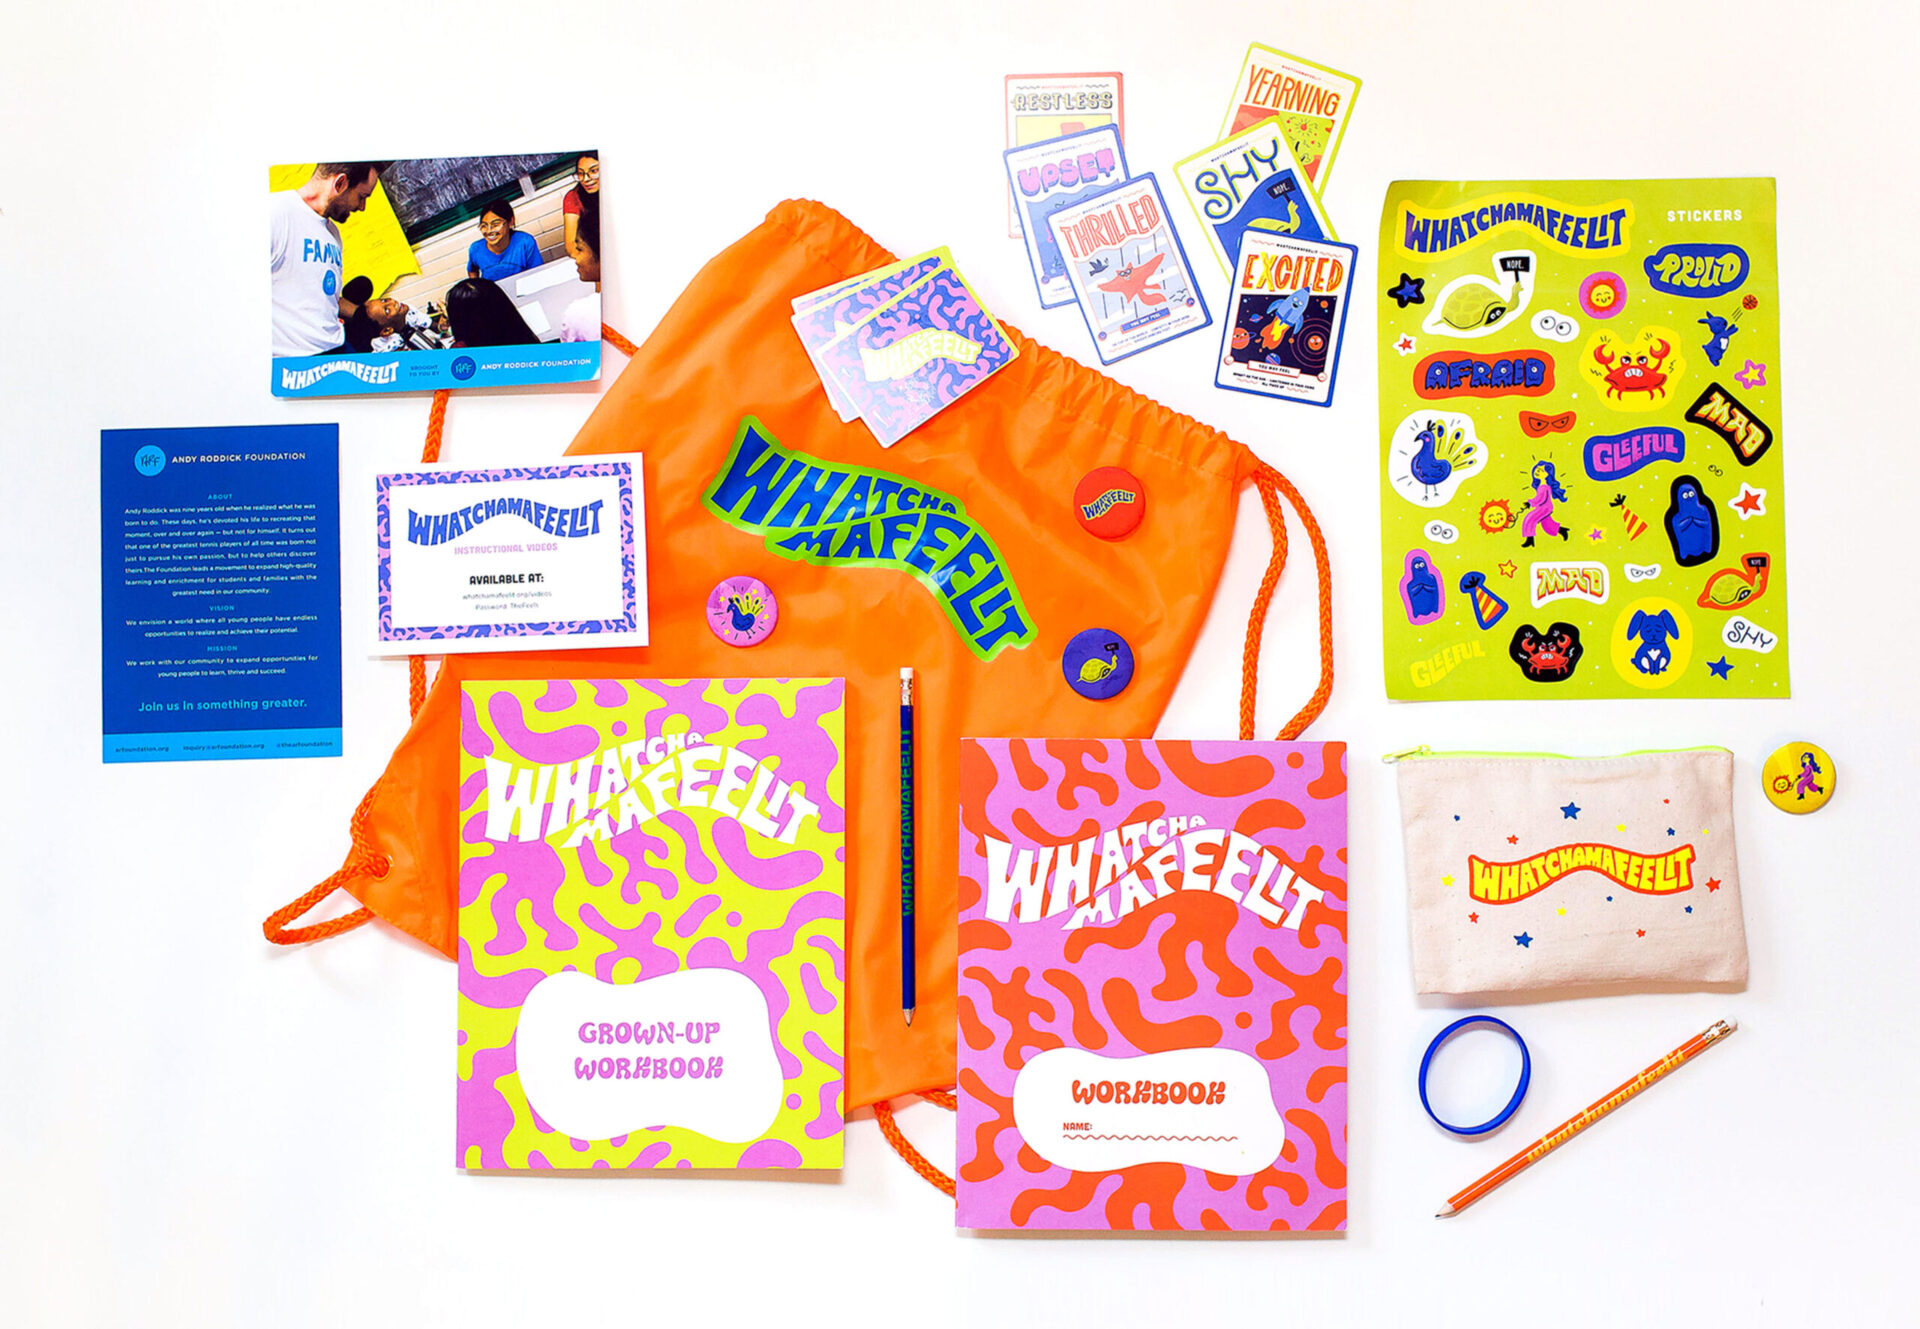 Whatchamafeelit-Kit swag collateral